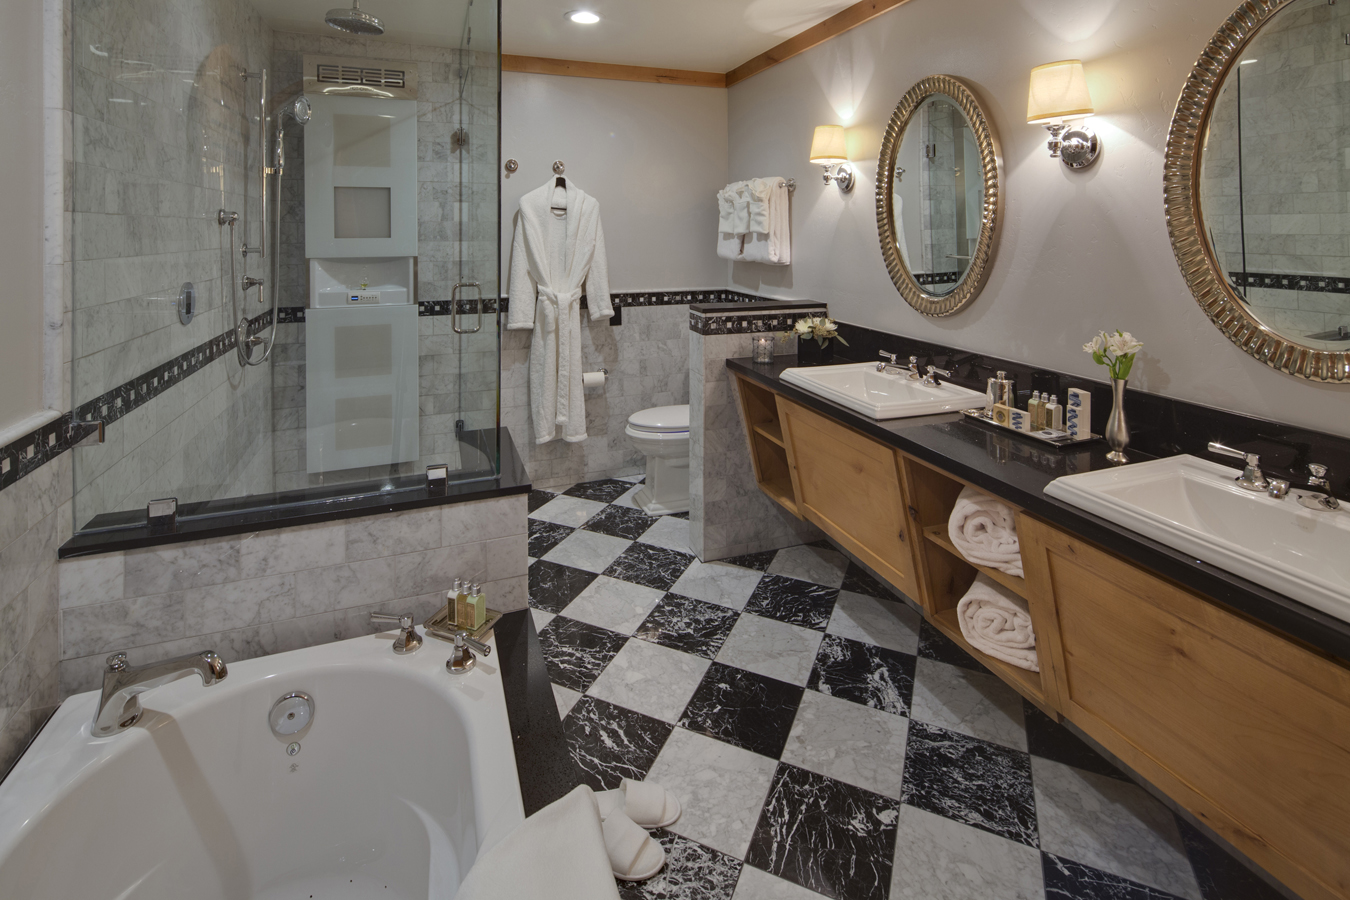 The Landing’s luxurious marble baths are known for their spa-like feel, including snowy white robes and towels, double sinks, oversize sunflower shower heads and heated and lighted toilet seats.